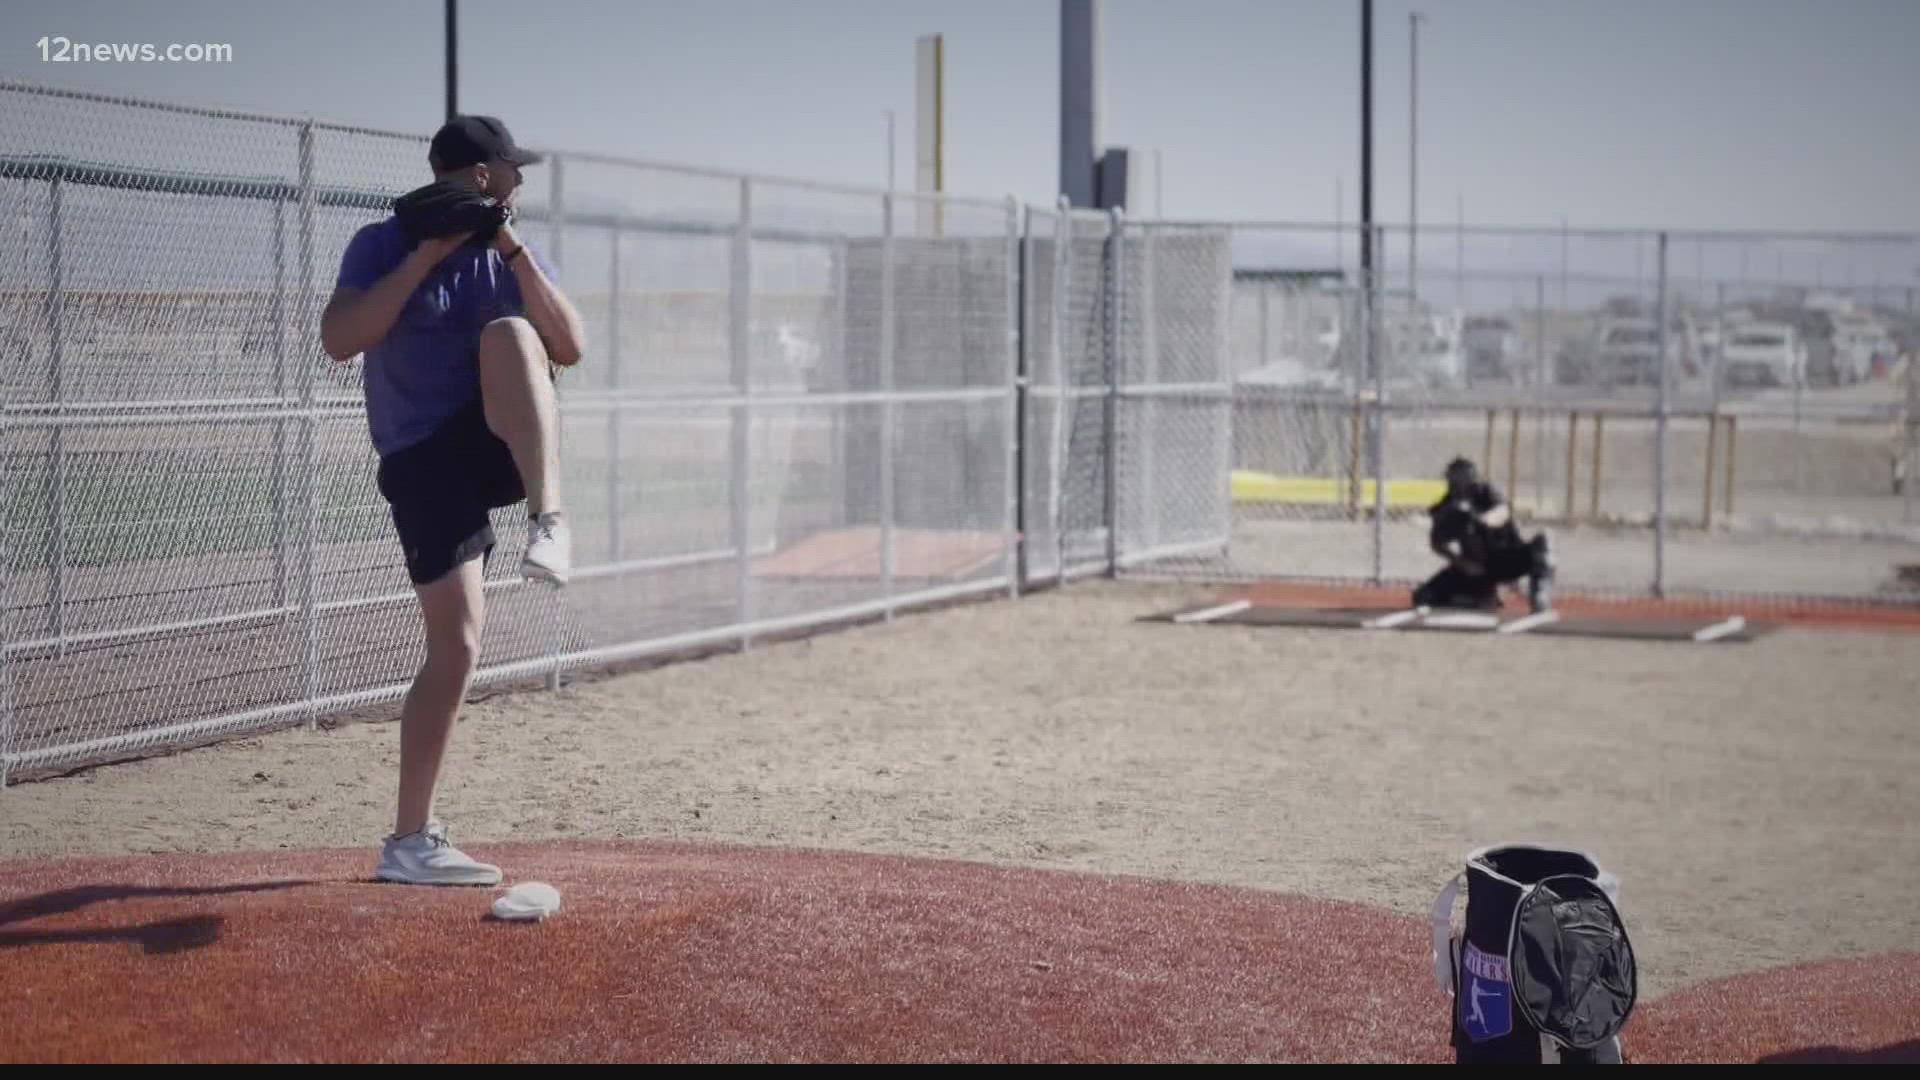 Despite gridlock between Major League Baseball and the players association, some players are holding their own spring training at the Legacy Sports Complex in Mesa.